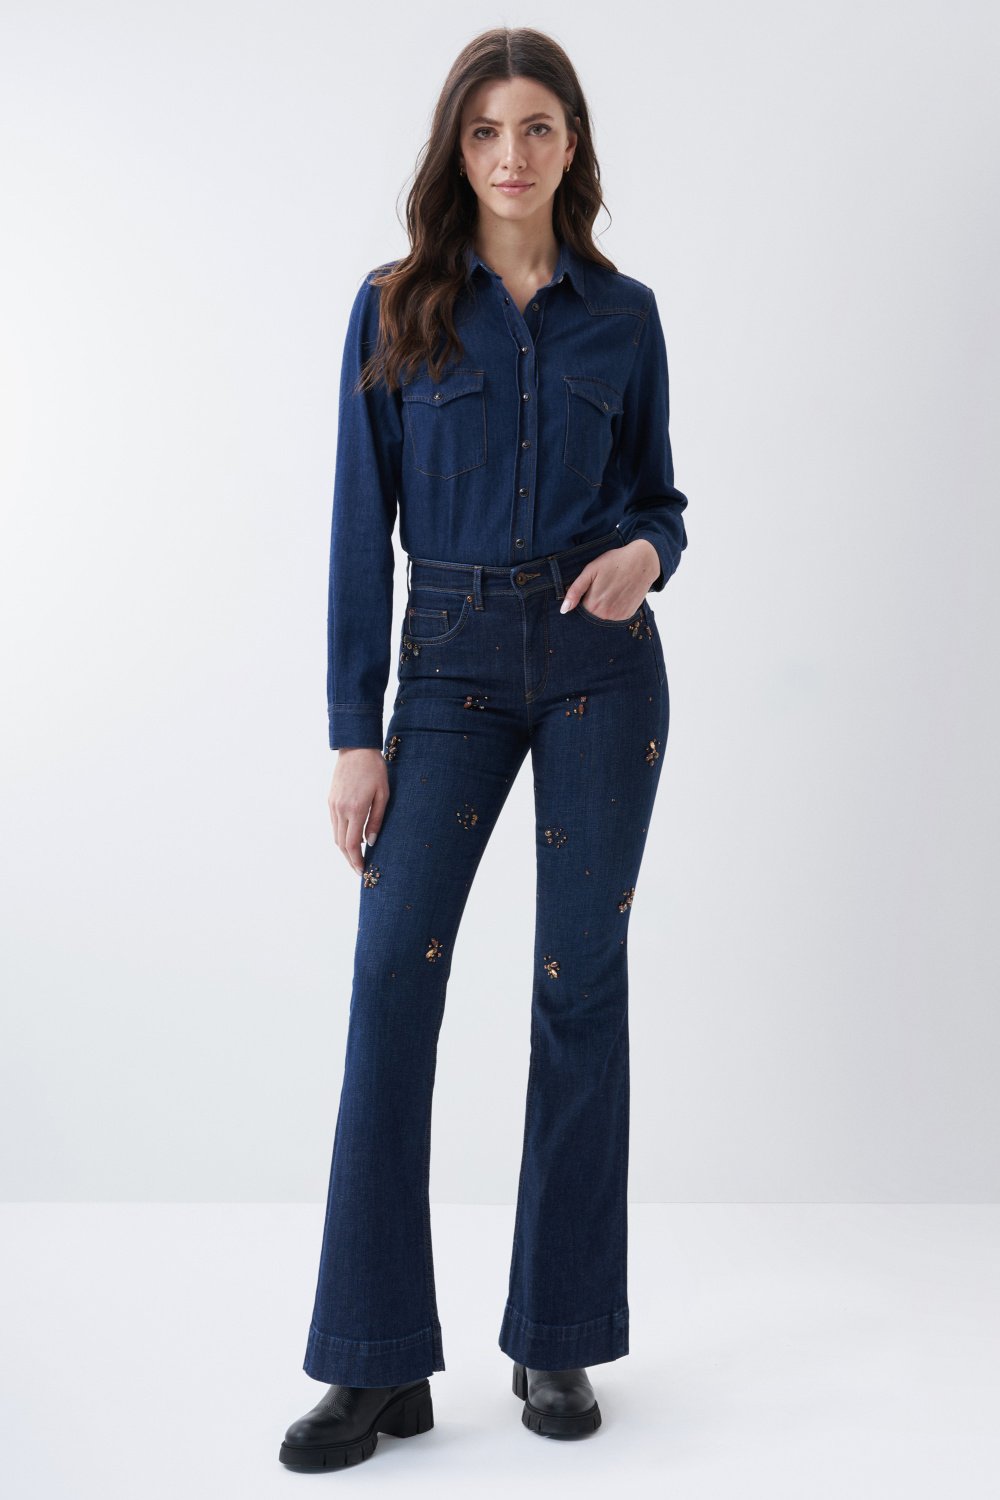 Push In Secret Glamor flare jeans with shiny details - Salsa